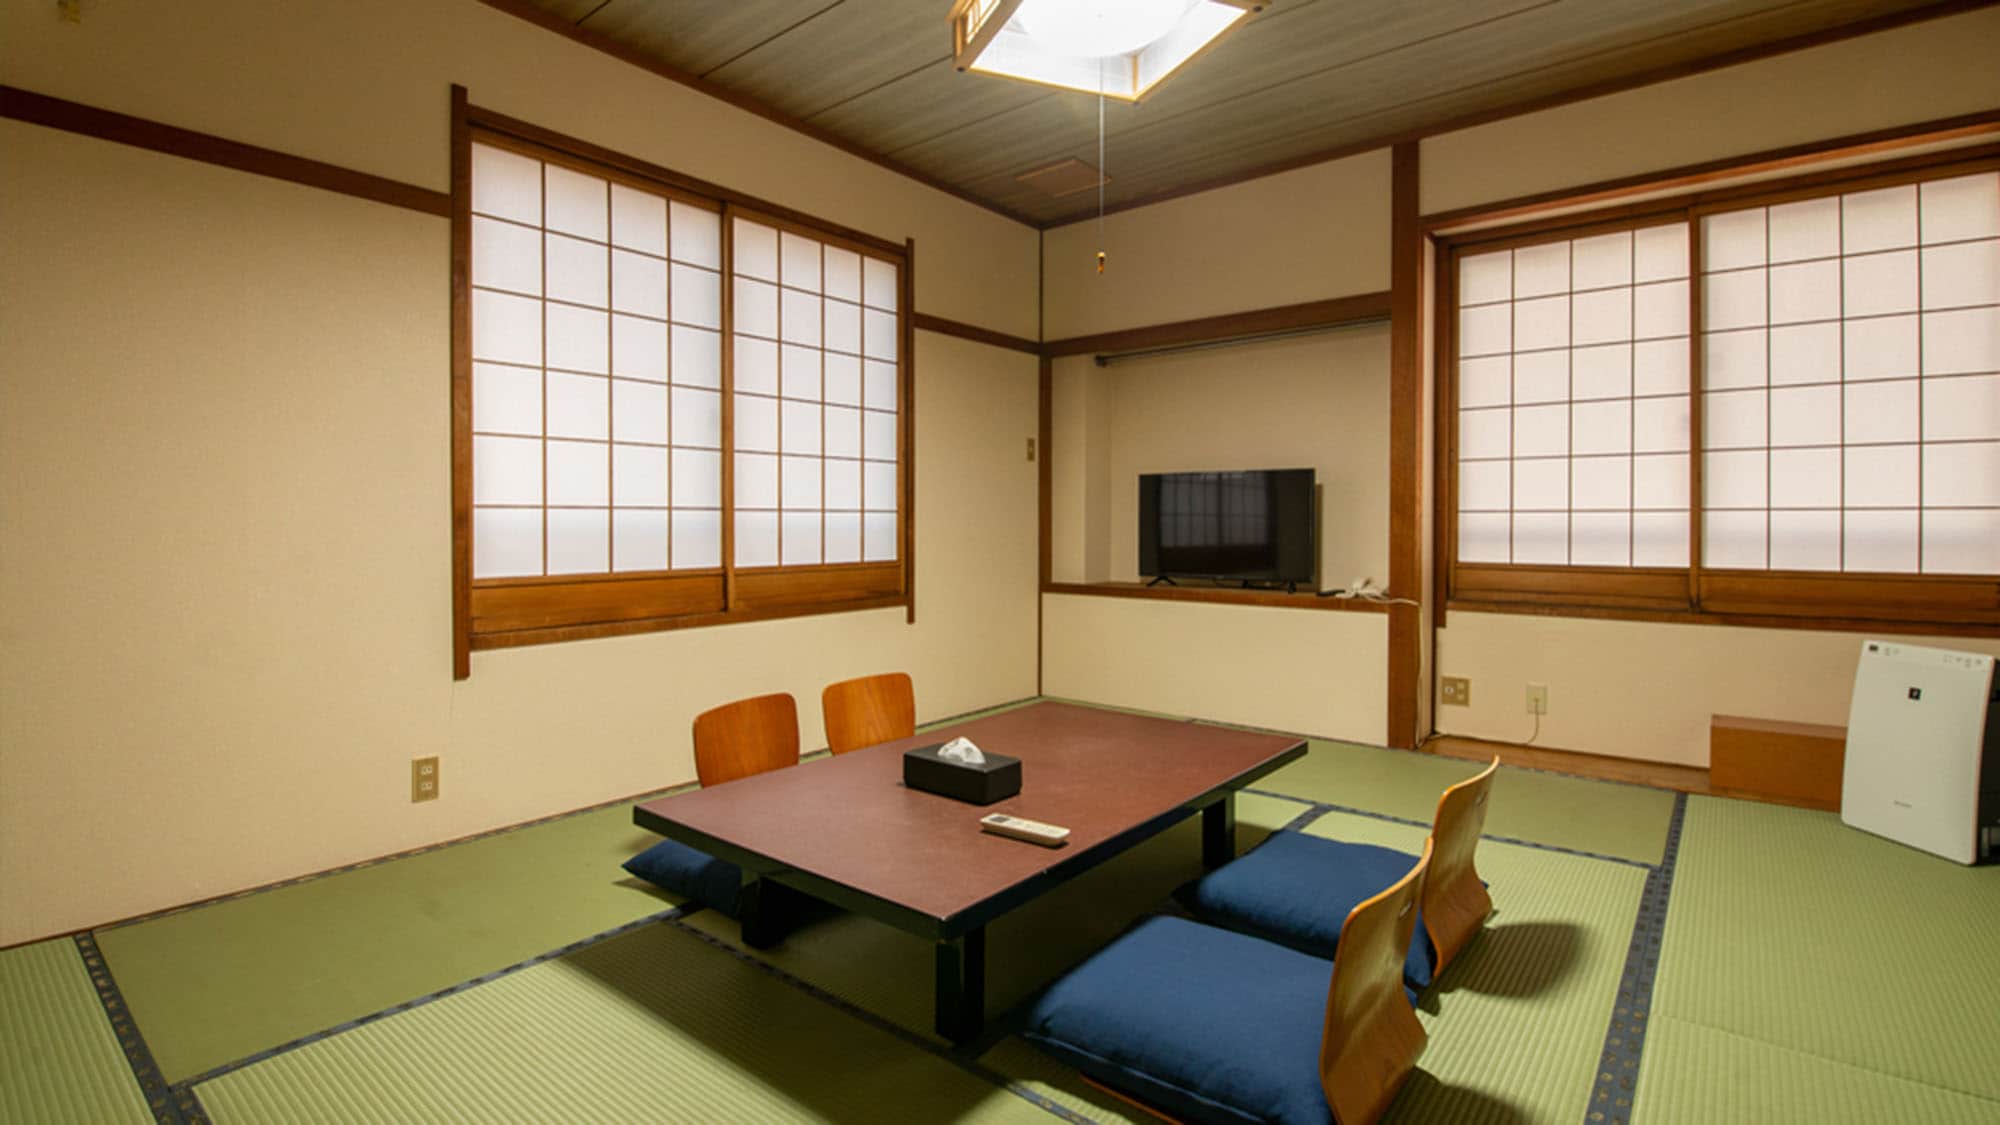 ・ Let's stretch out our limbs and relax in the tatami room.